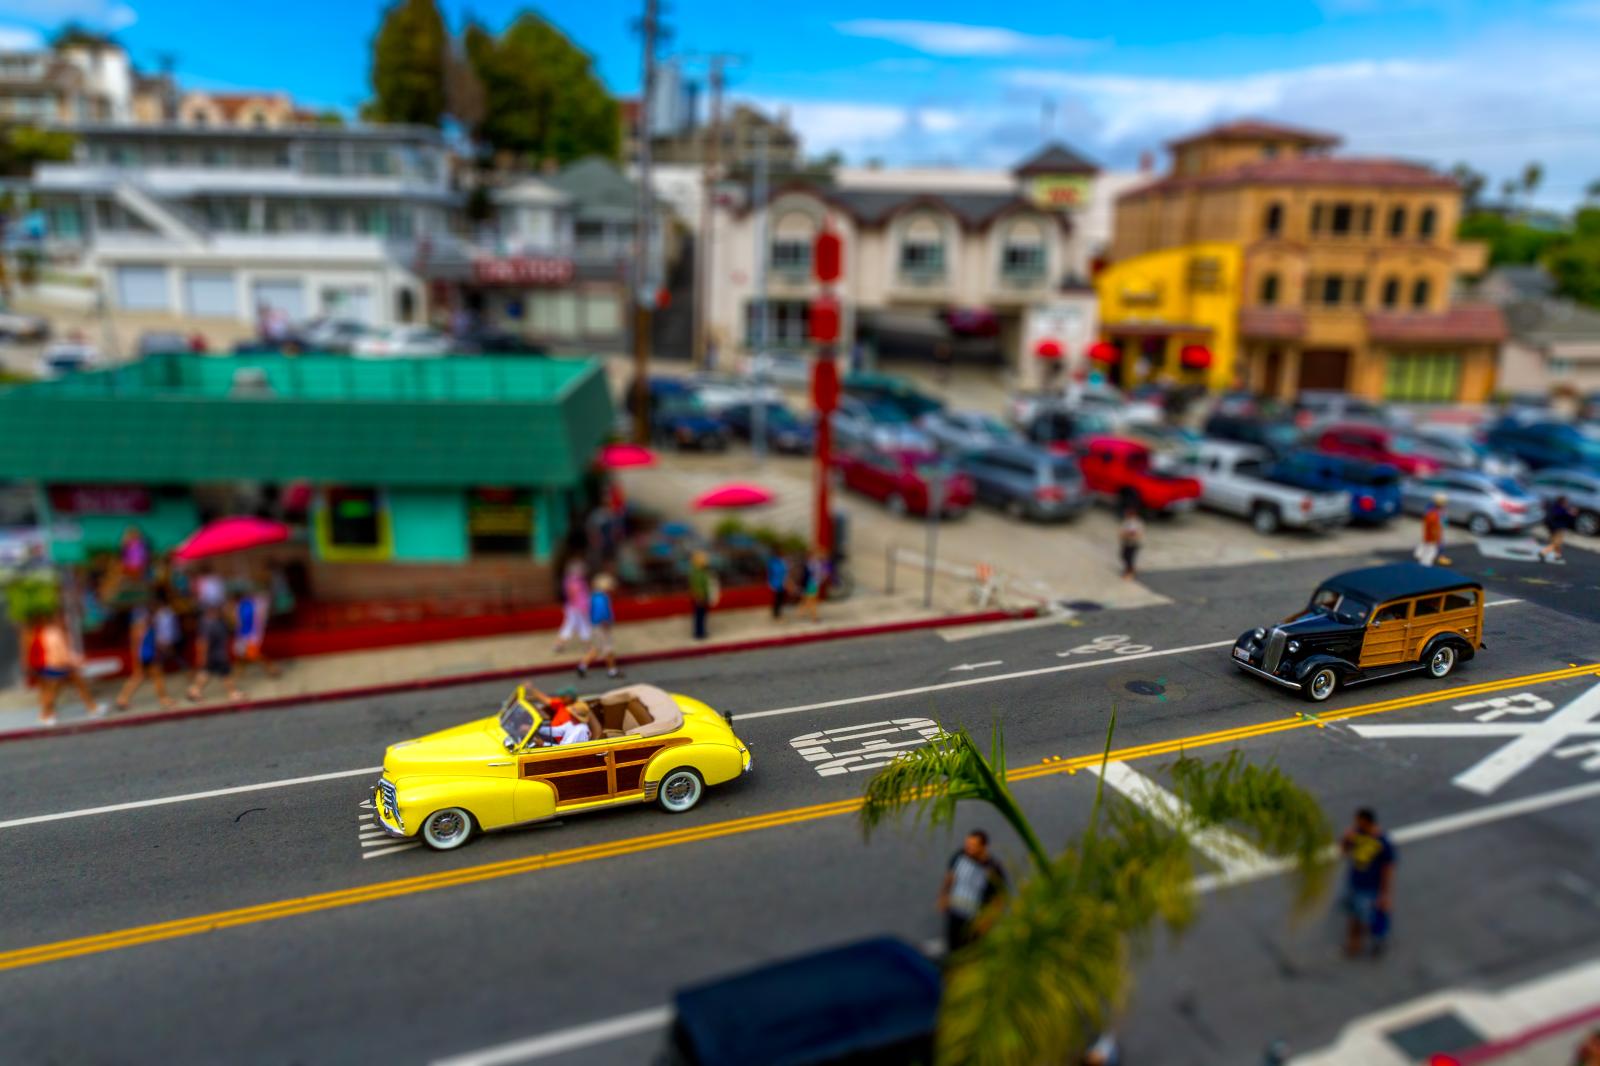 Yellow Woodie Tilt shift | Buy this image